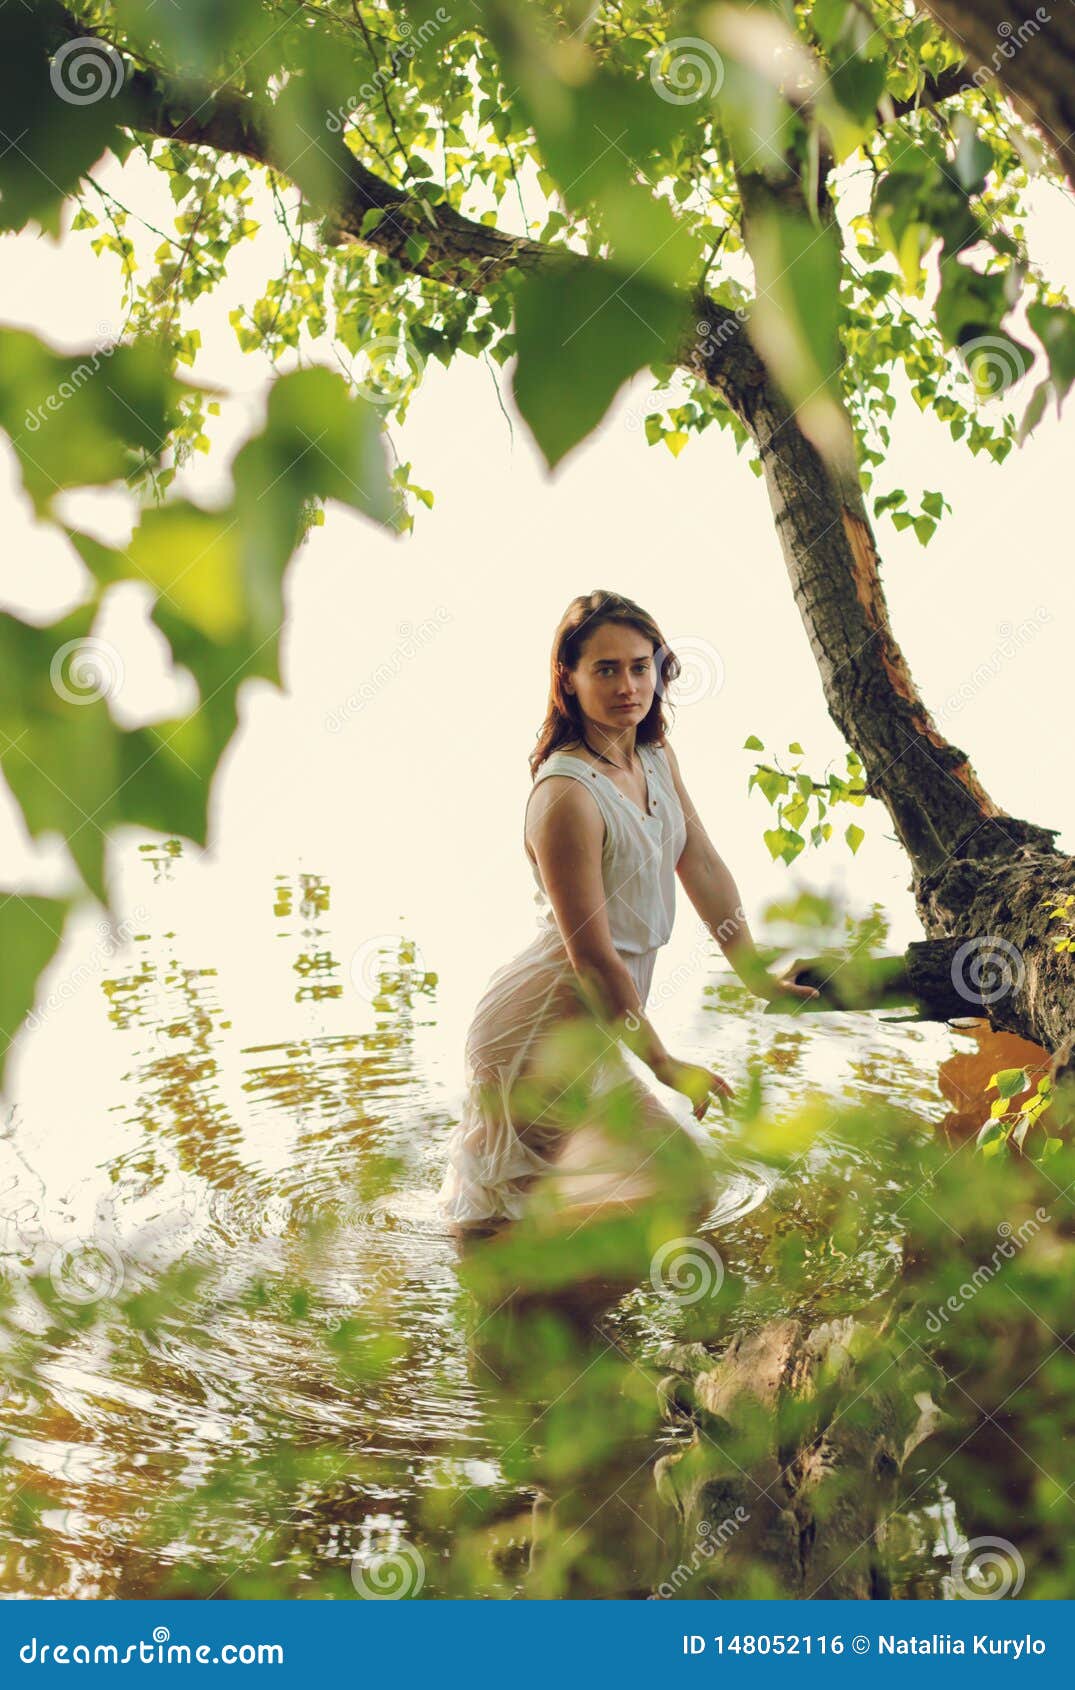 Happy Beautiful Pregnant Woman In Dress Poses Near Tree In Sunny Park Stock  Photo, Picture and Royalty Free Image. Image 70732778.